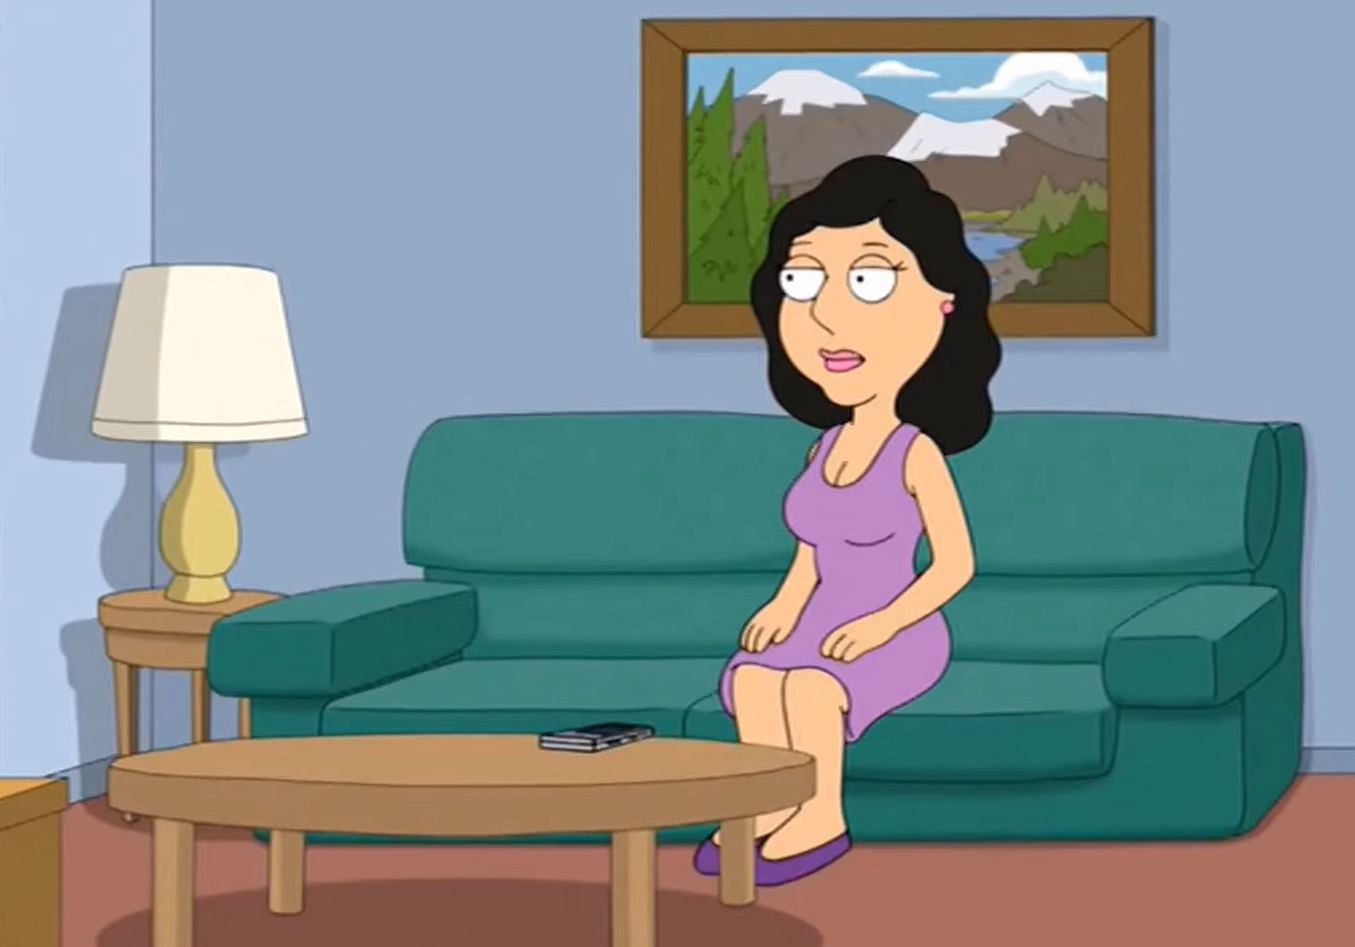 charles luckett recommends bonnie from family guy pic